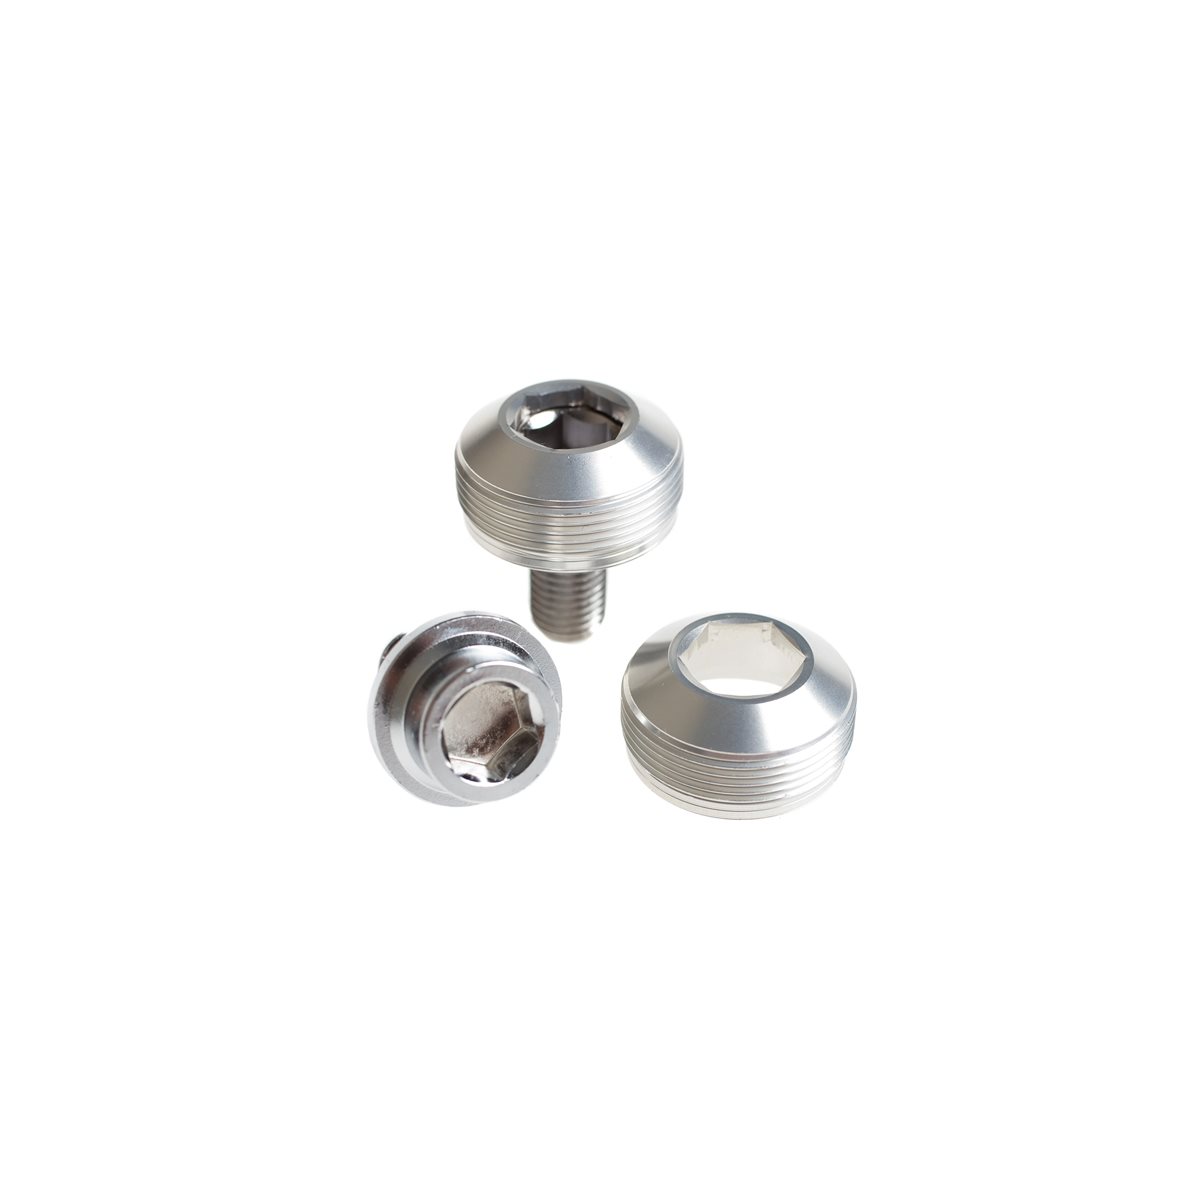 Alloy cup crank bolts with dust cover silver